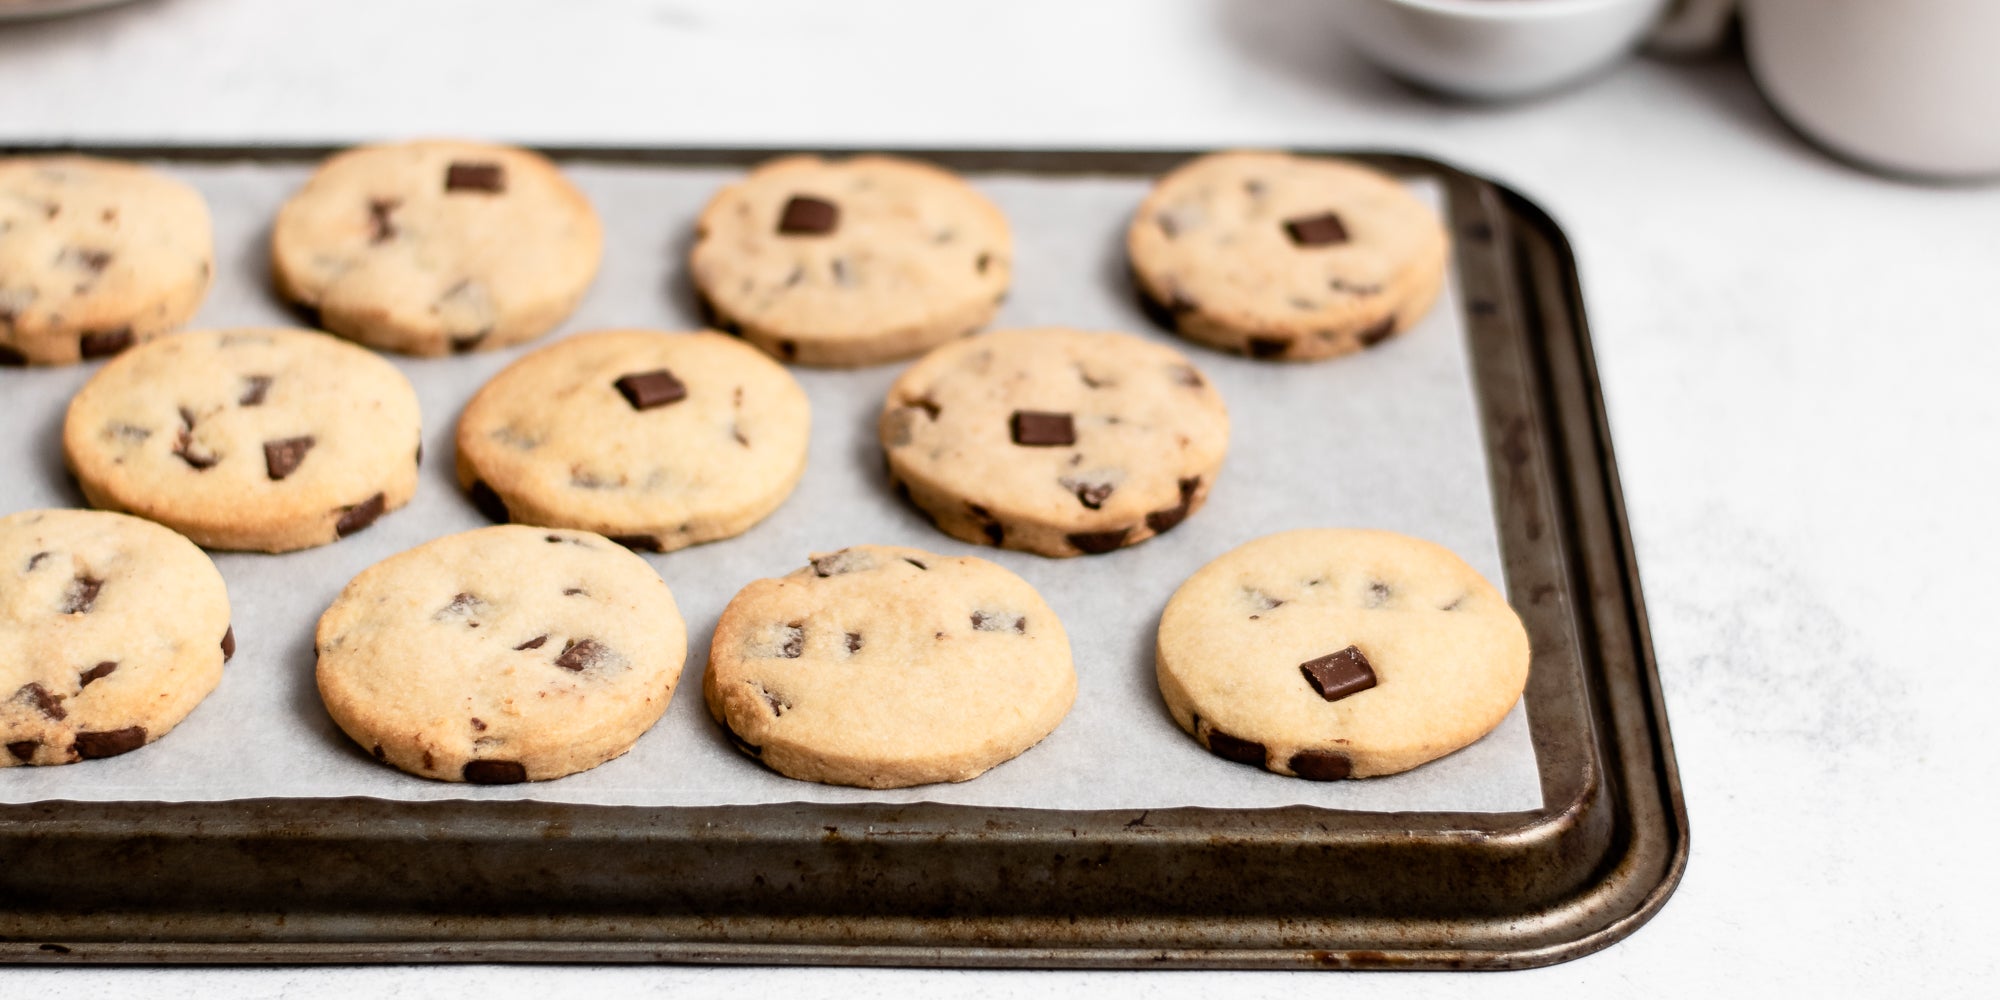 A batch of Chocolate Chunk Shortbread on a baking tray with baking paper